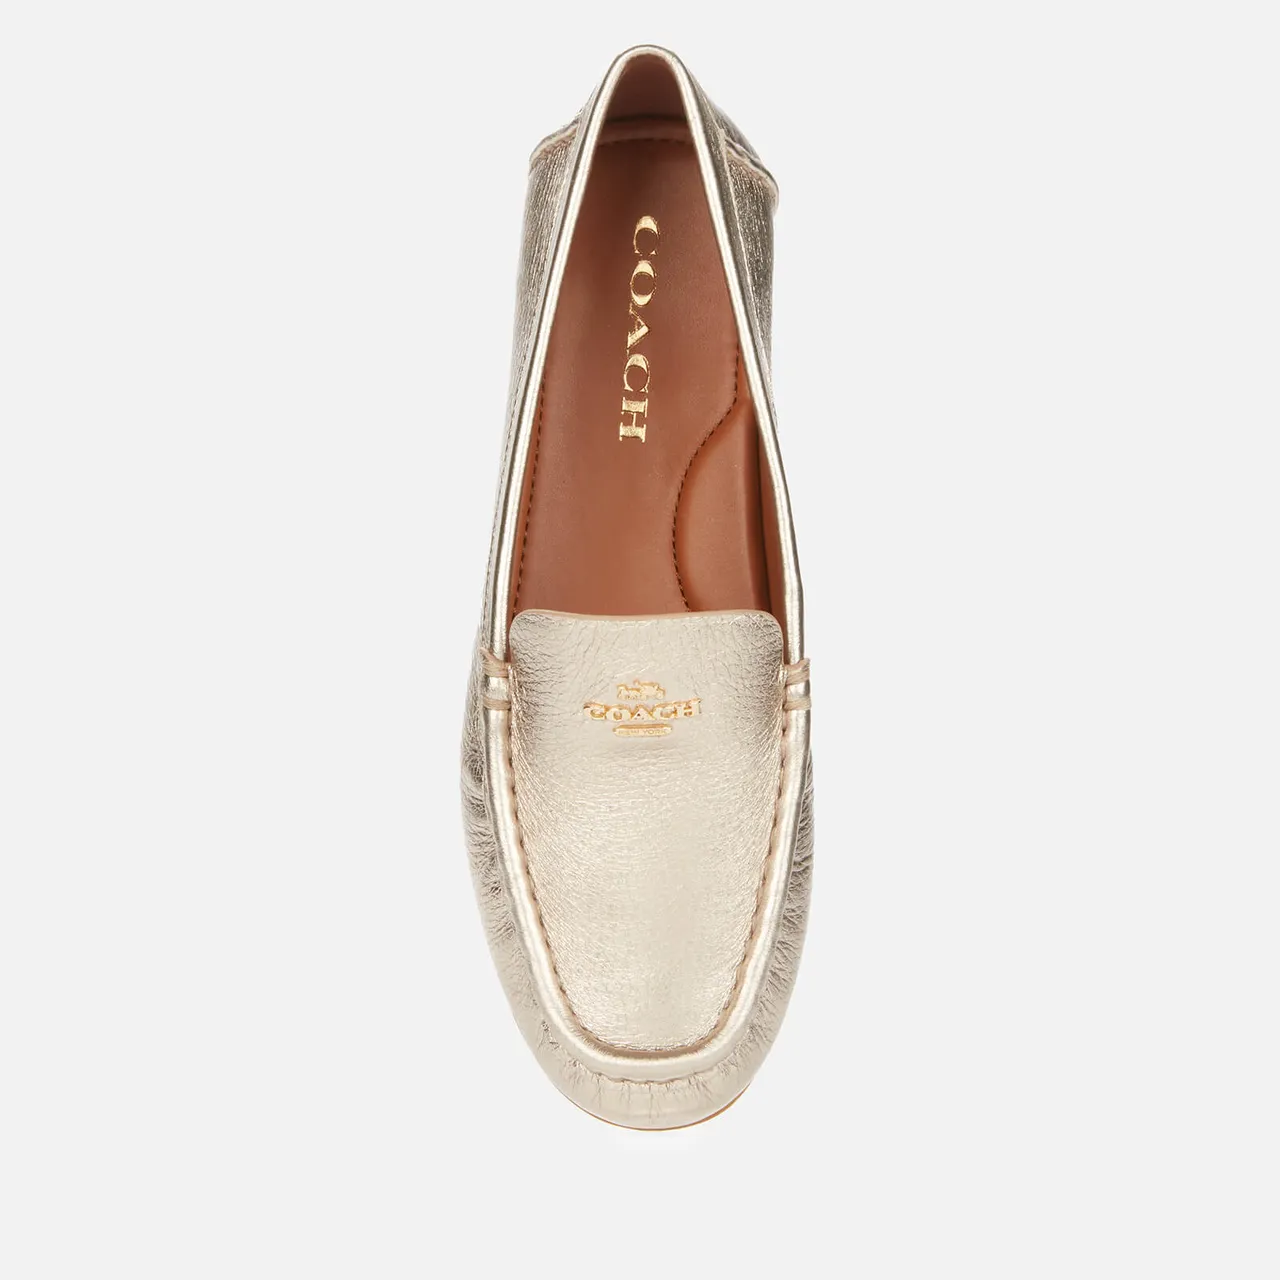 Coach Women's Marley Metallic Leather Driving Shoes - Champagne - UK